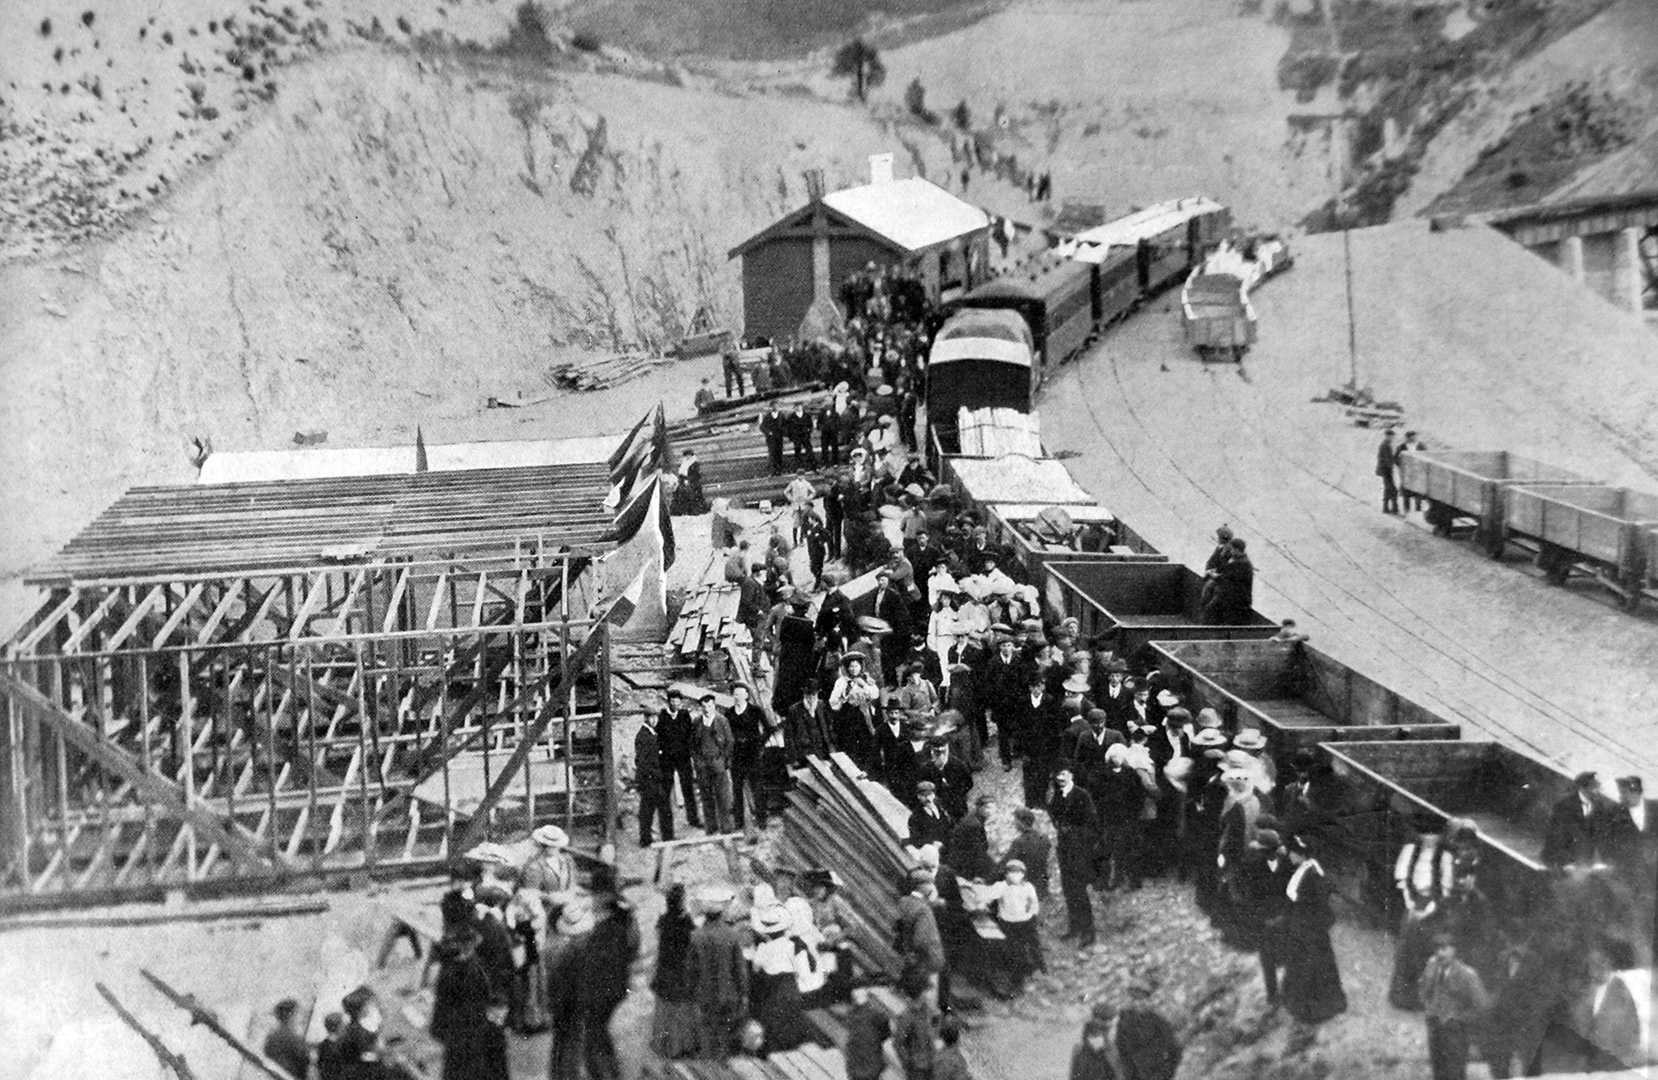 The first passenger train from Broken River to Christchurch